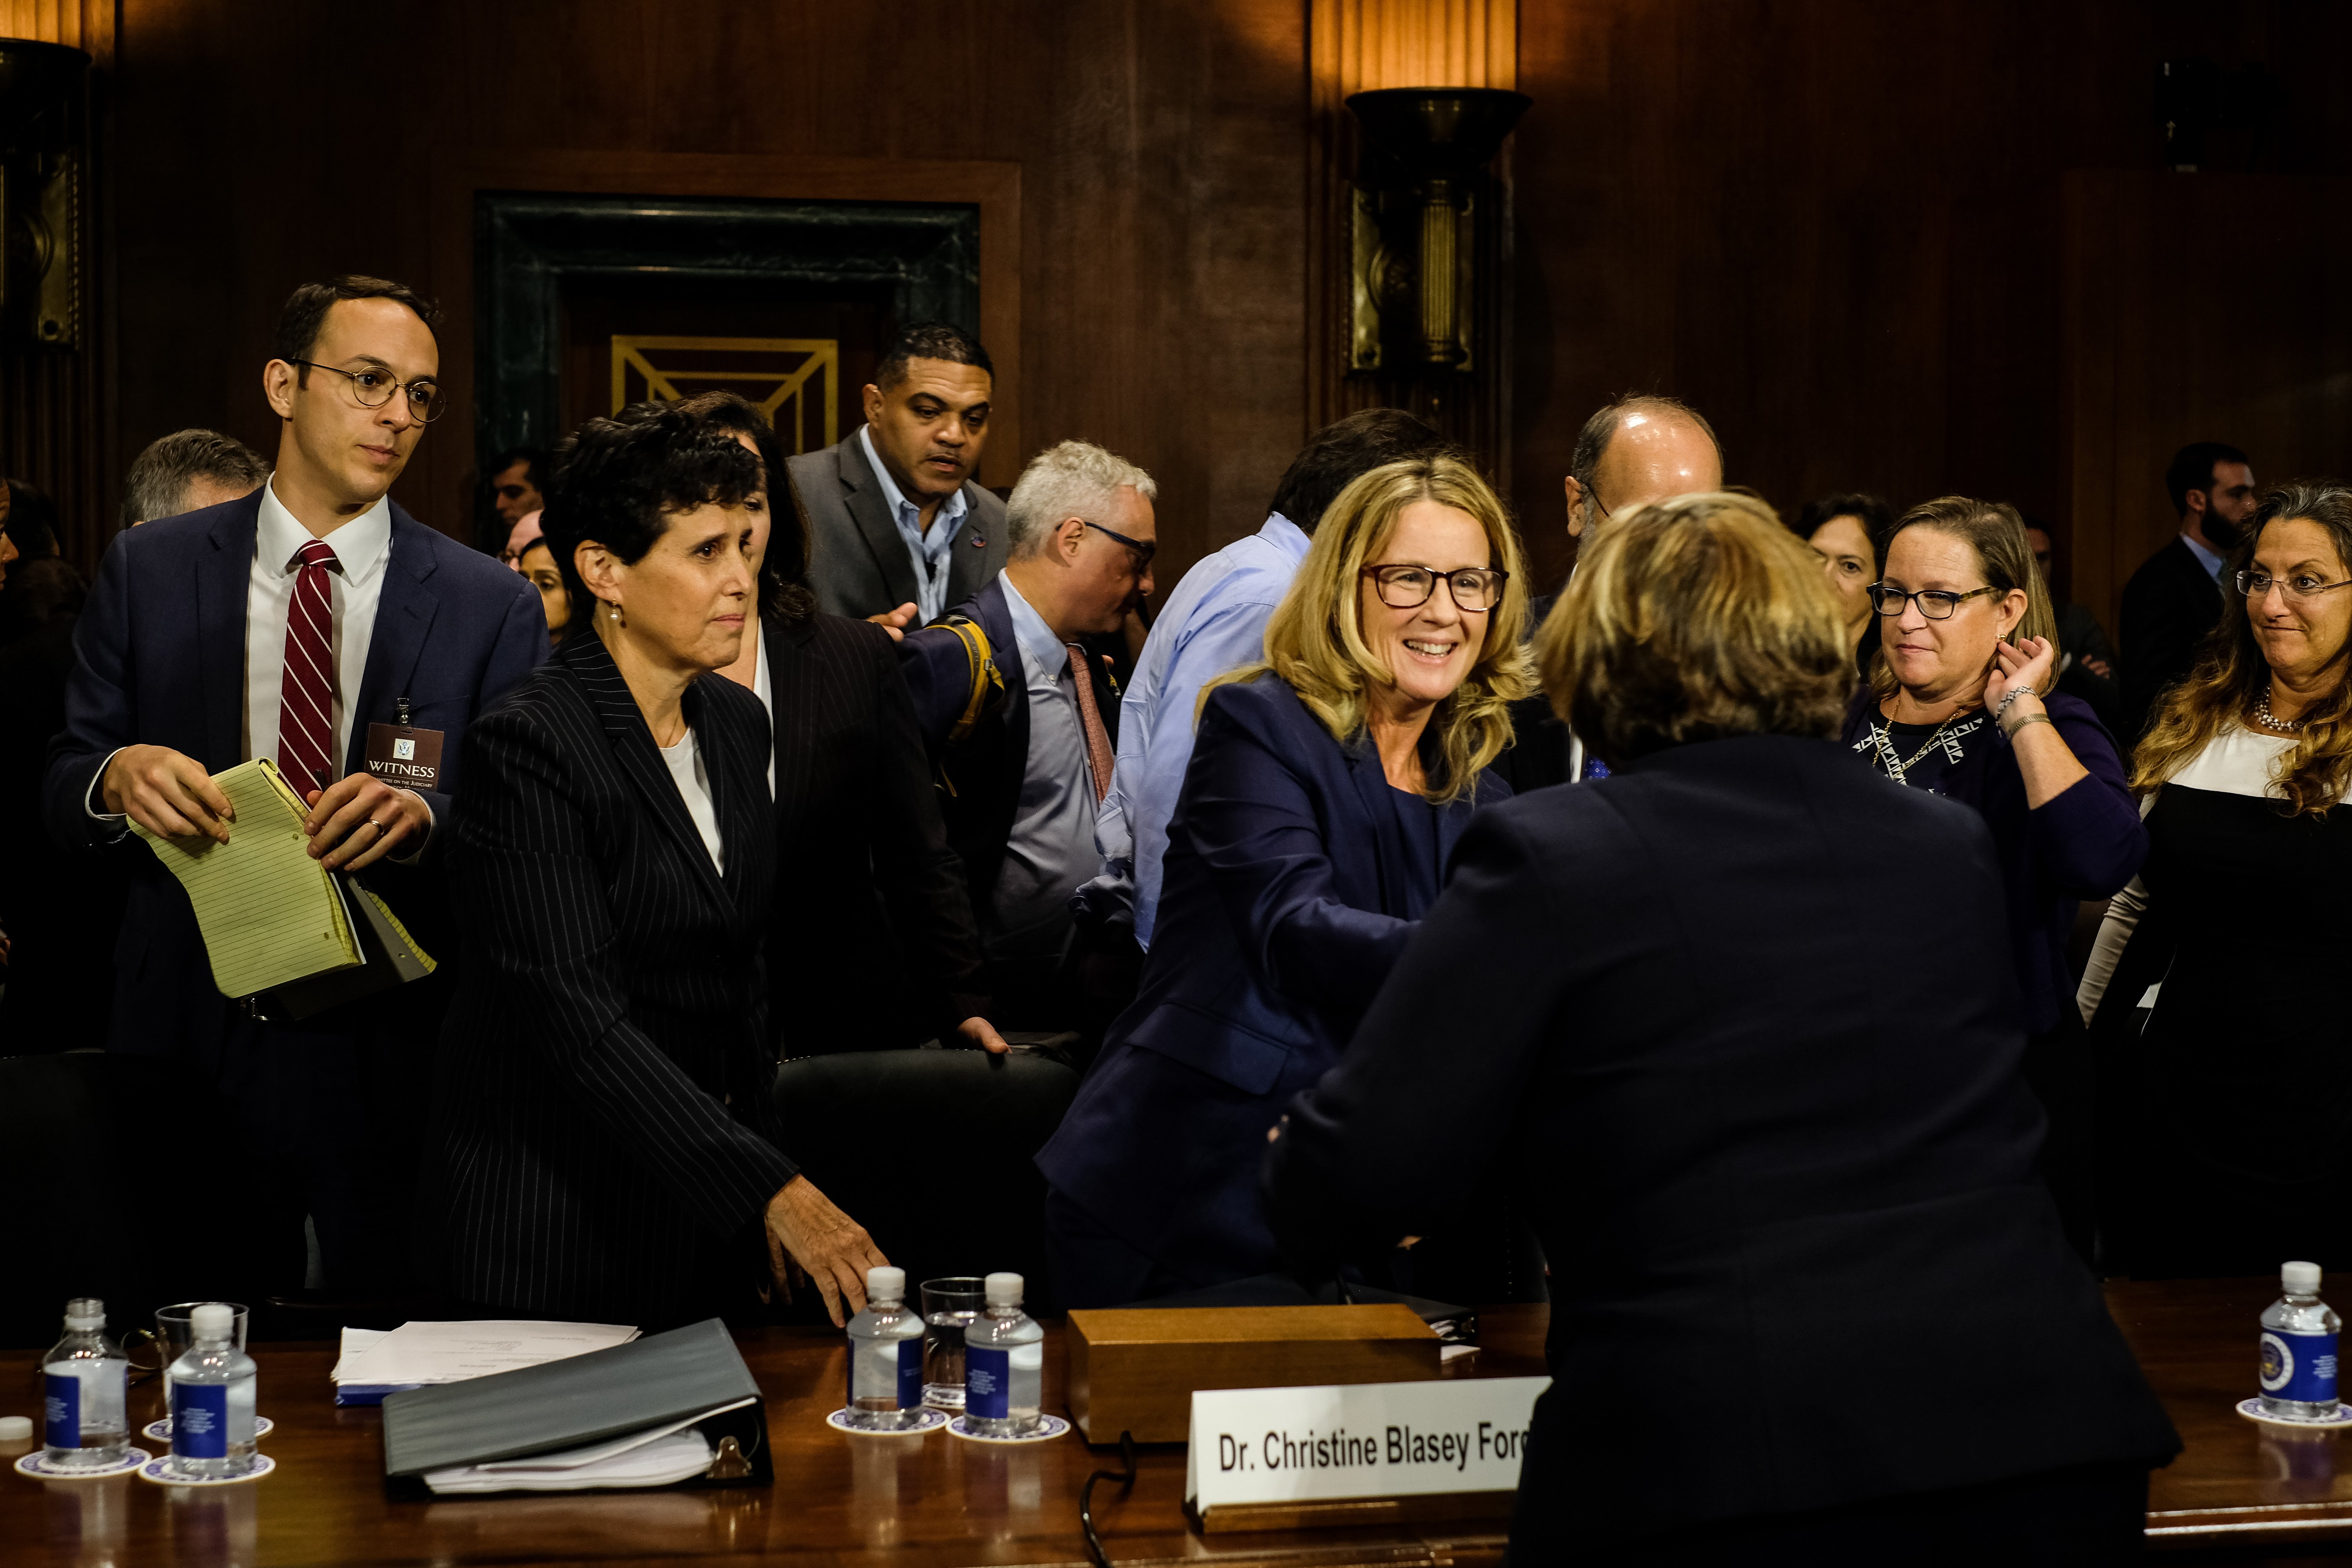 WASHINGTON, DC - SEPTEMBER 27: Christine Blasey Ford (C) shakes hands with Rachel Mitchell, chief of the Special Victims Division of the Maricopa County attorney's office in Arizona, who questioned Blasey Ford at a hearing of the U.S. Senate Judiciary Committee at the Dirksen Senate Office Building on Capitol Hill September 27, 2018 in Washington, DC. (Gabriella Demczuk-Pool/Getty Images)